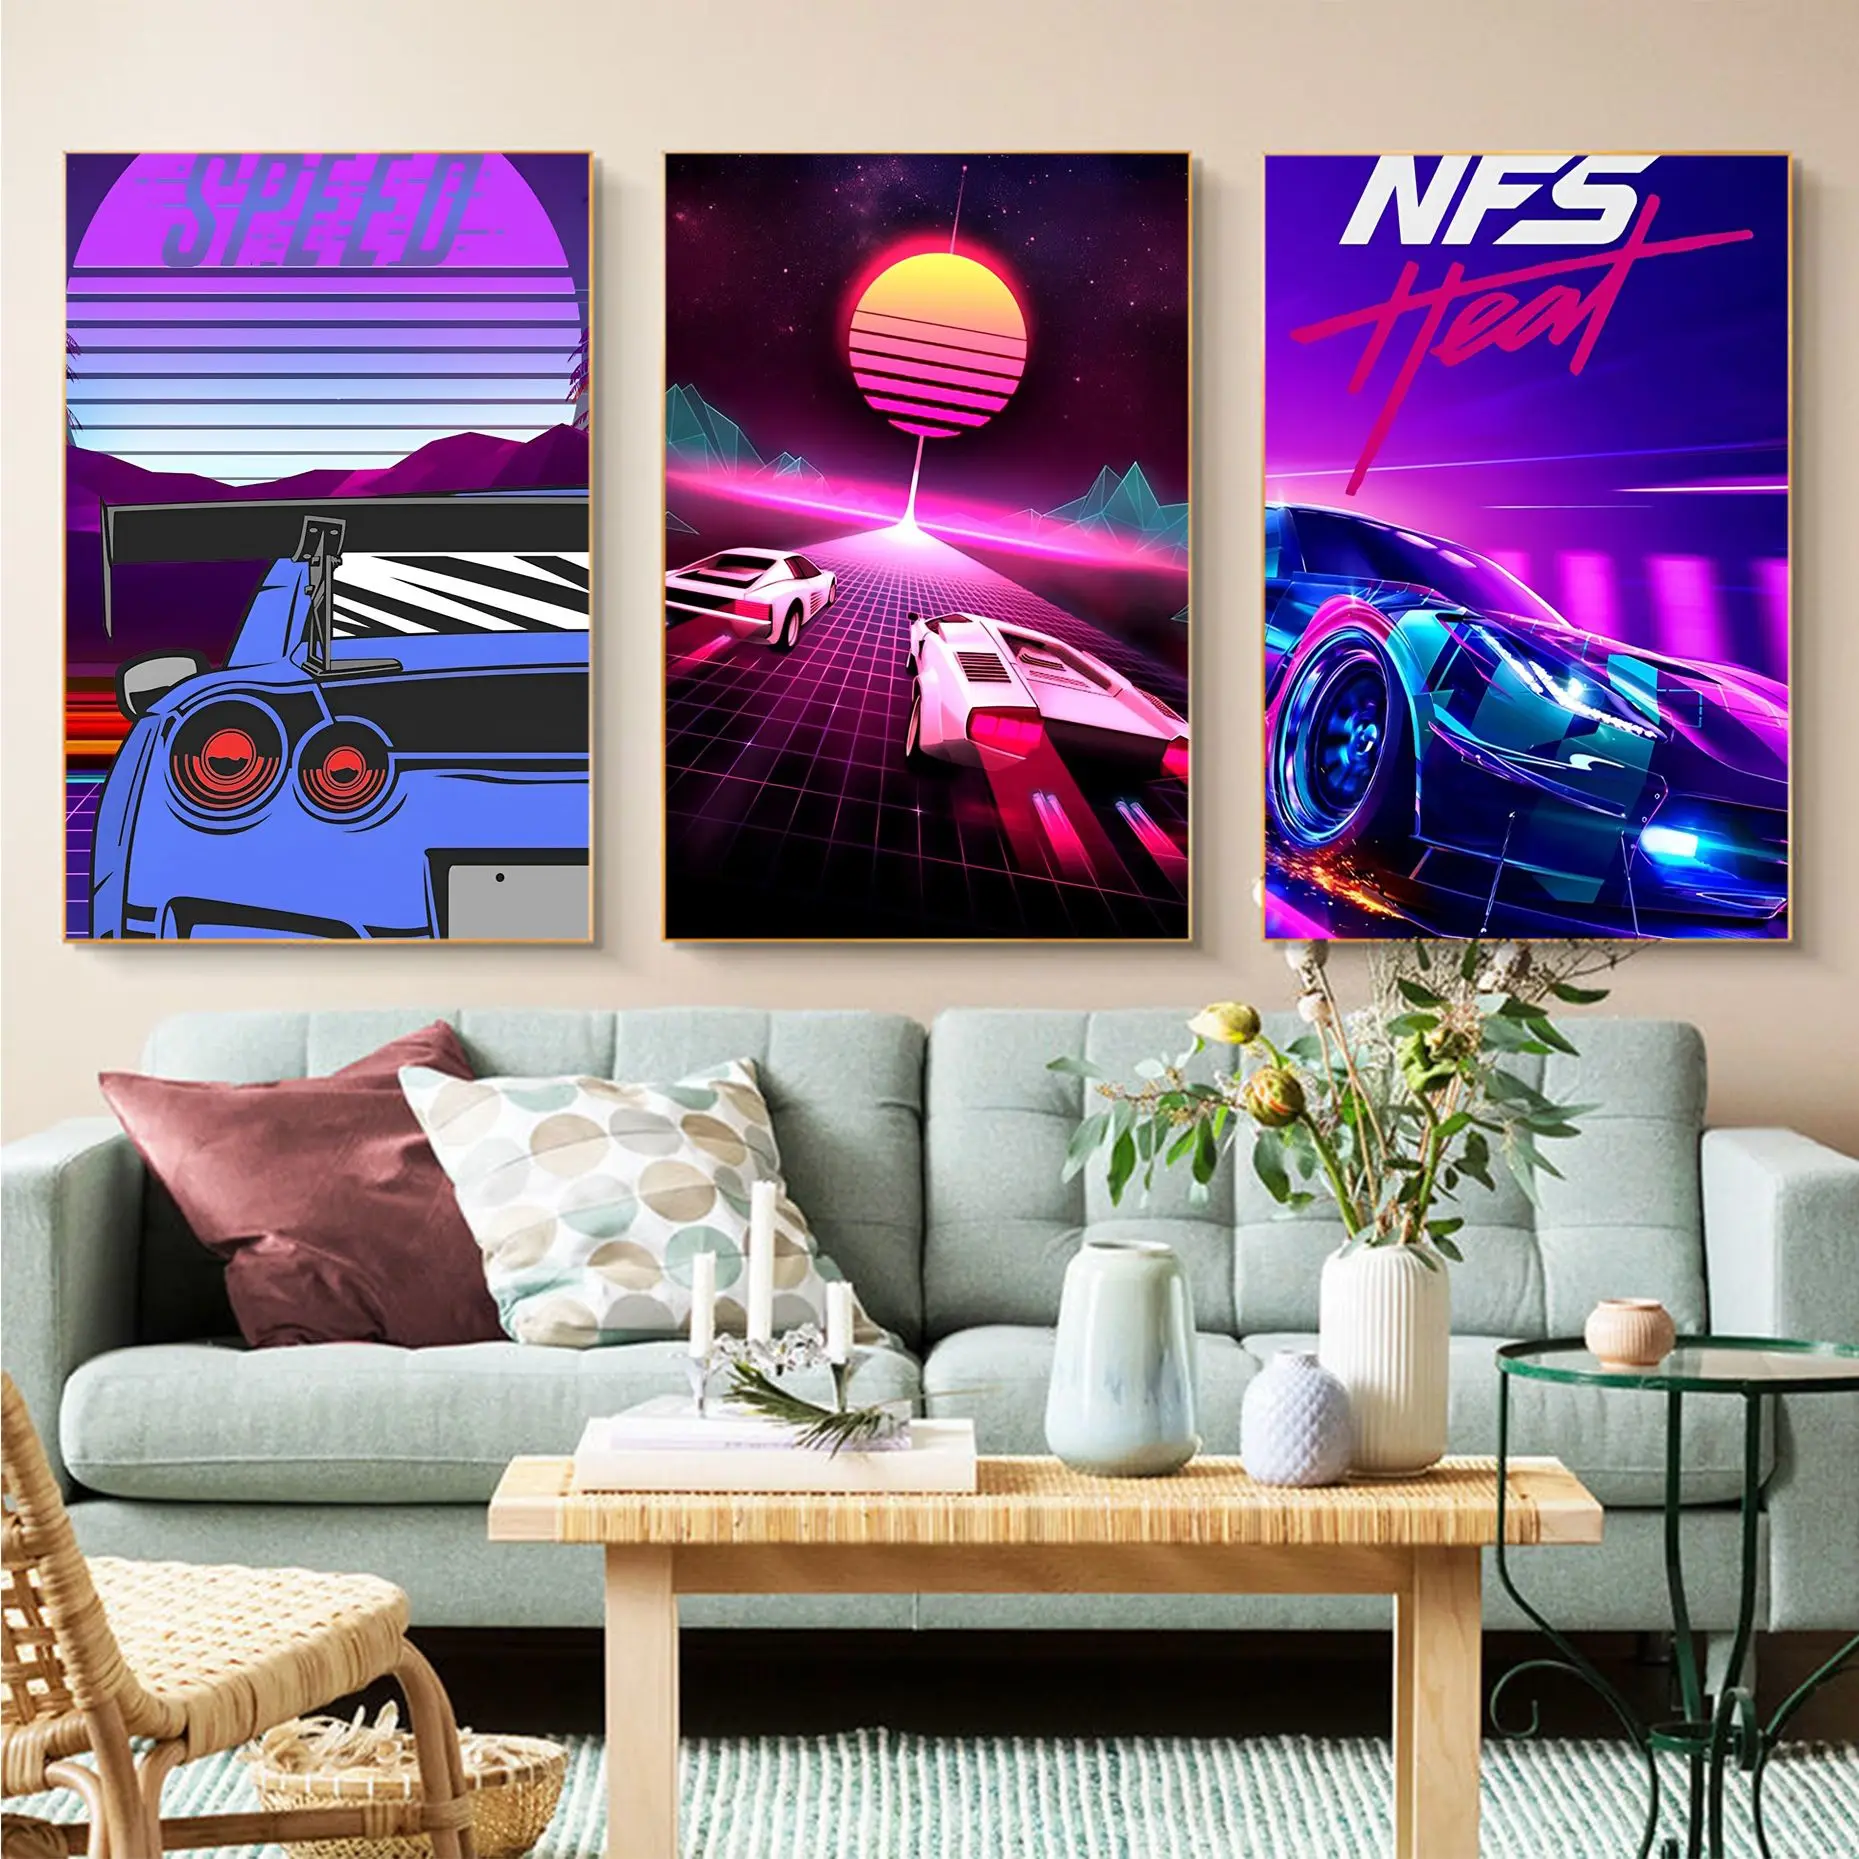 

JDM Car Anime Posters Sticky Whitepaper Sticker DIY Room Bar Cafe Aesthetic Art Wall Painting